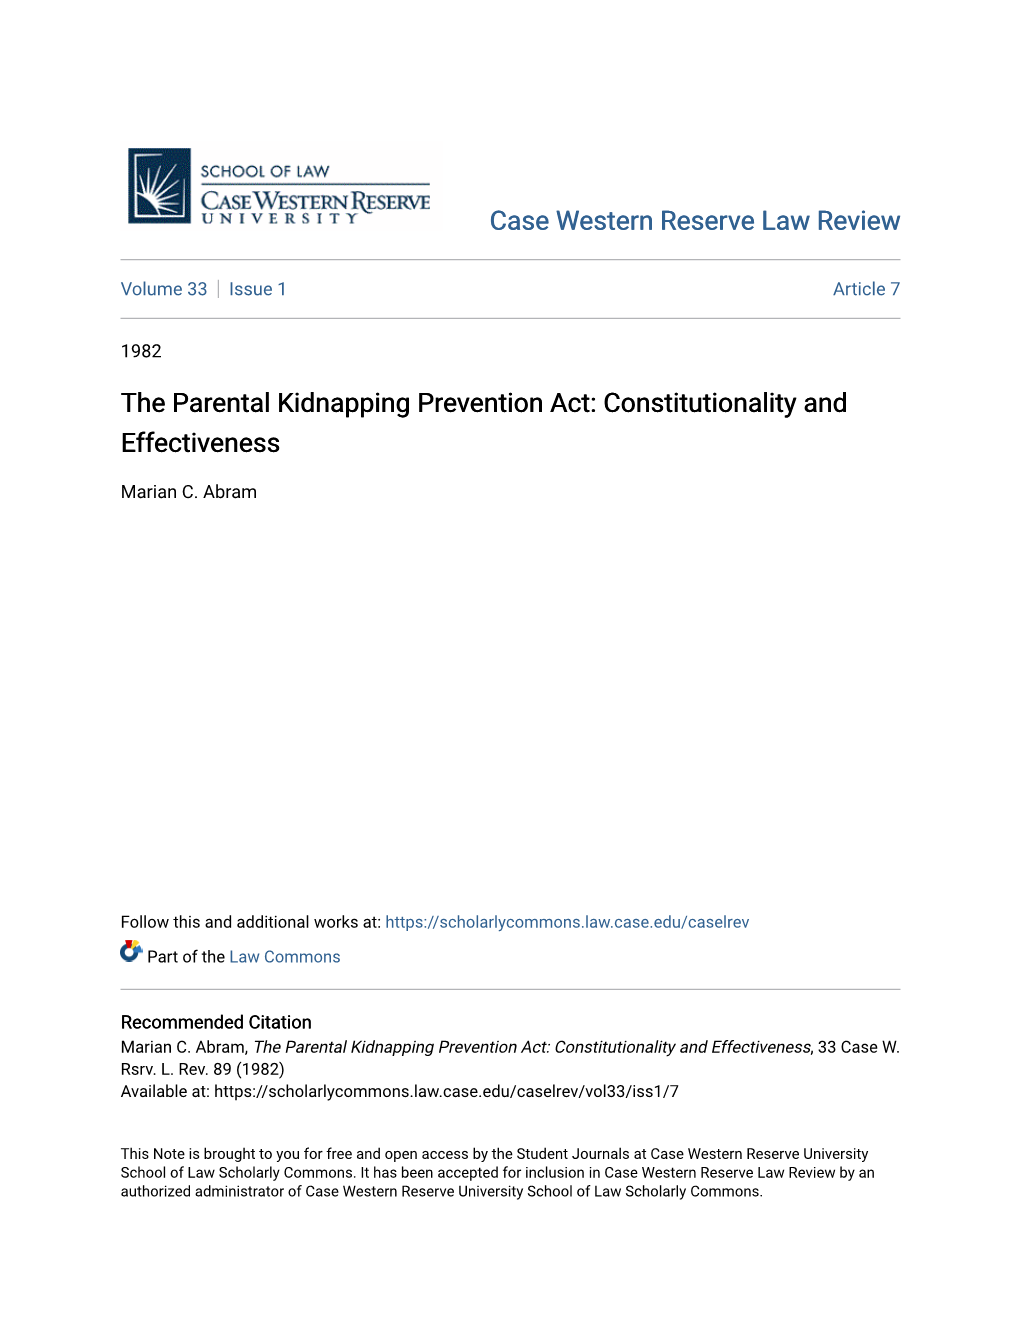 The Parental Kidnapping Prevention Act: Constitutionality and Effectiveness